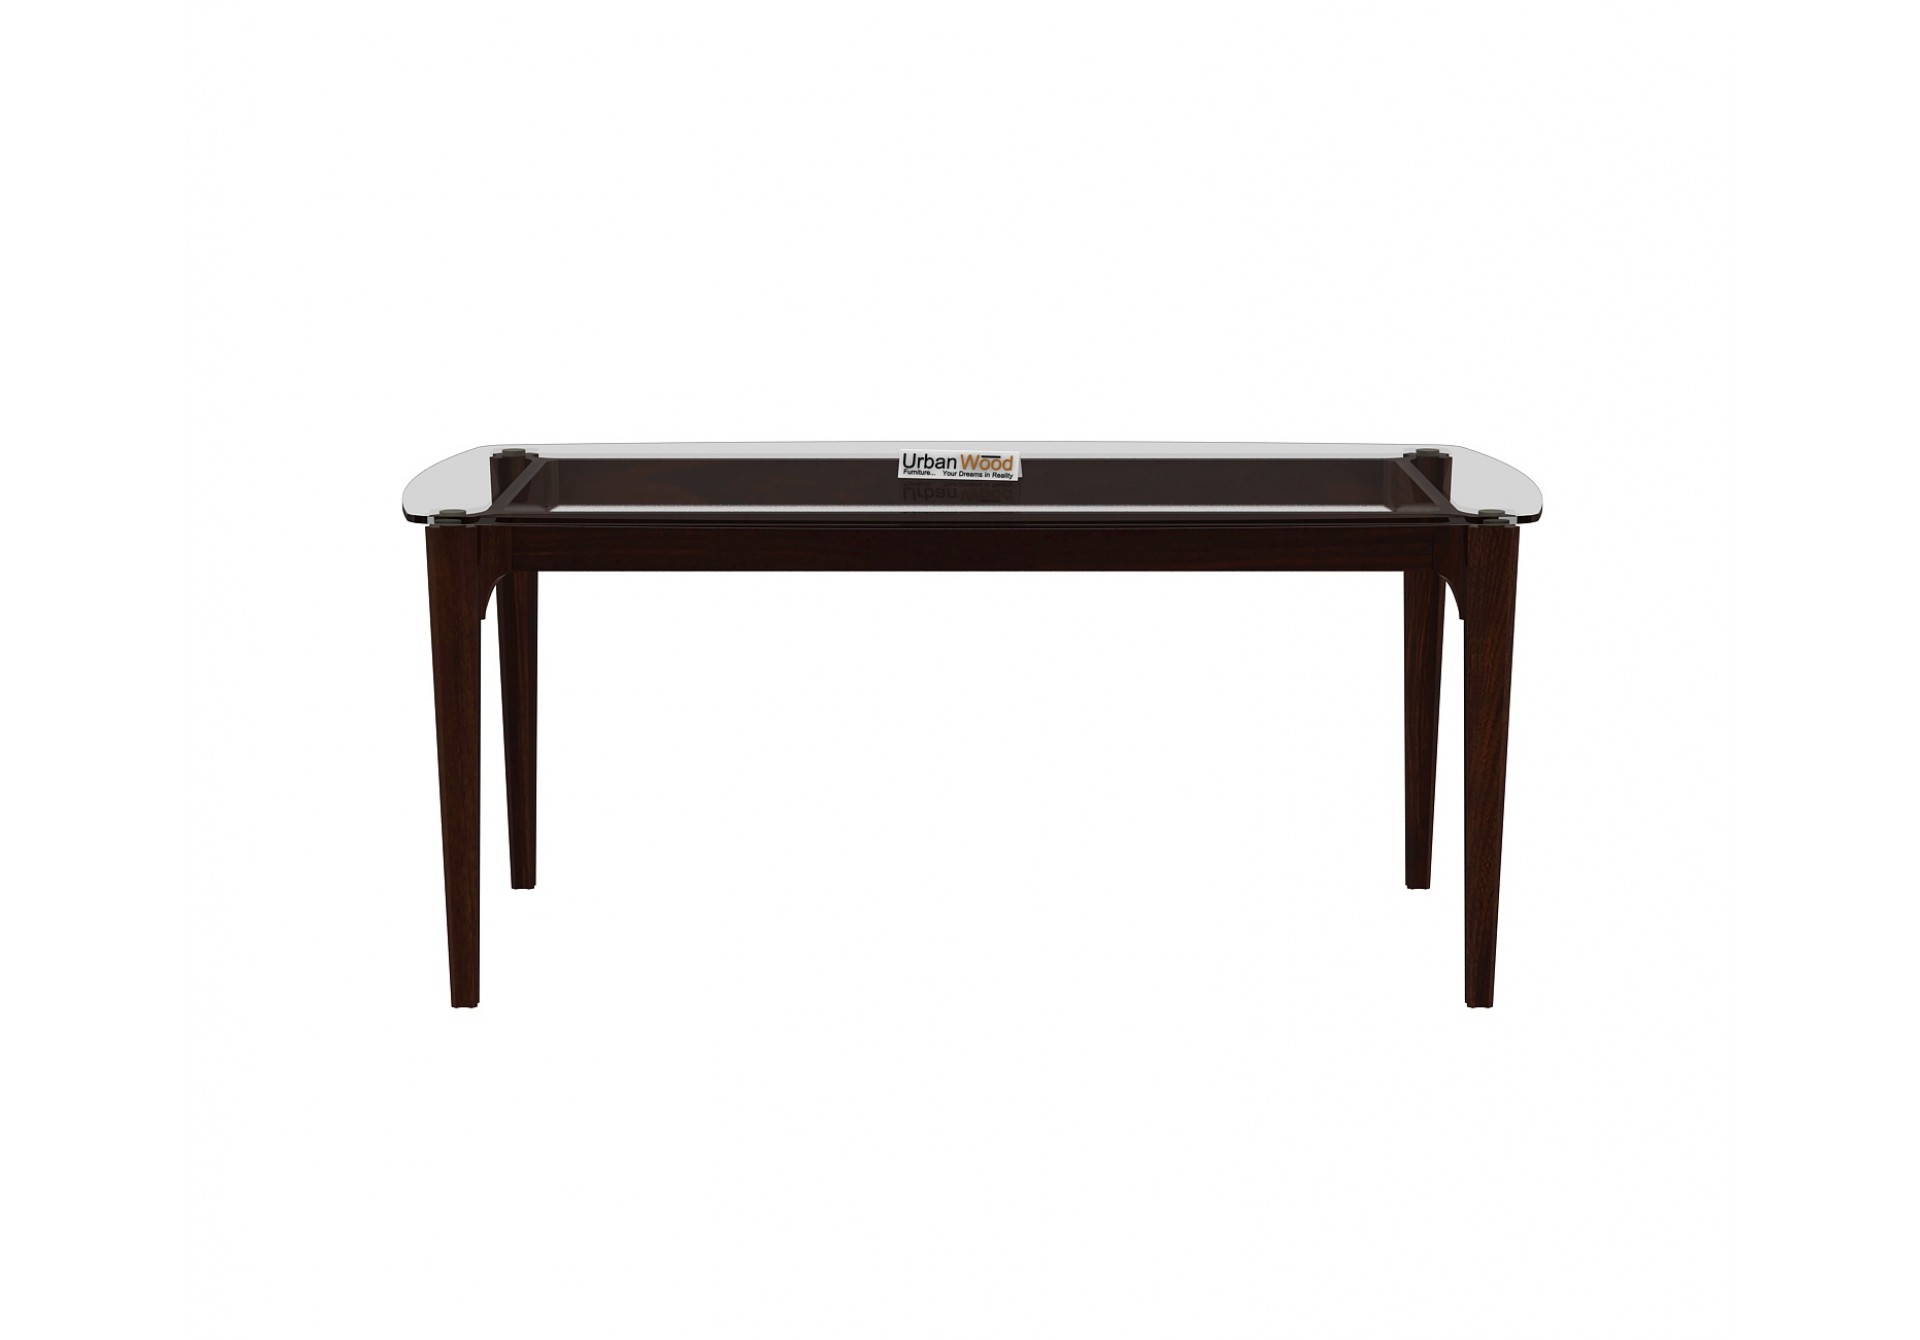 Quipo 6-Seater Dining Table (Walnut Finish)